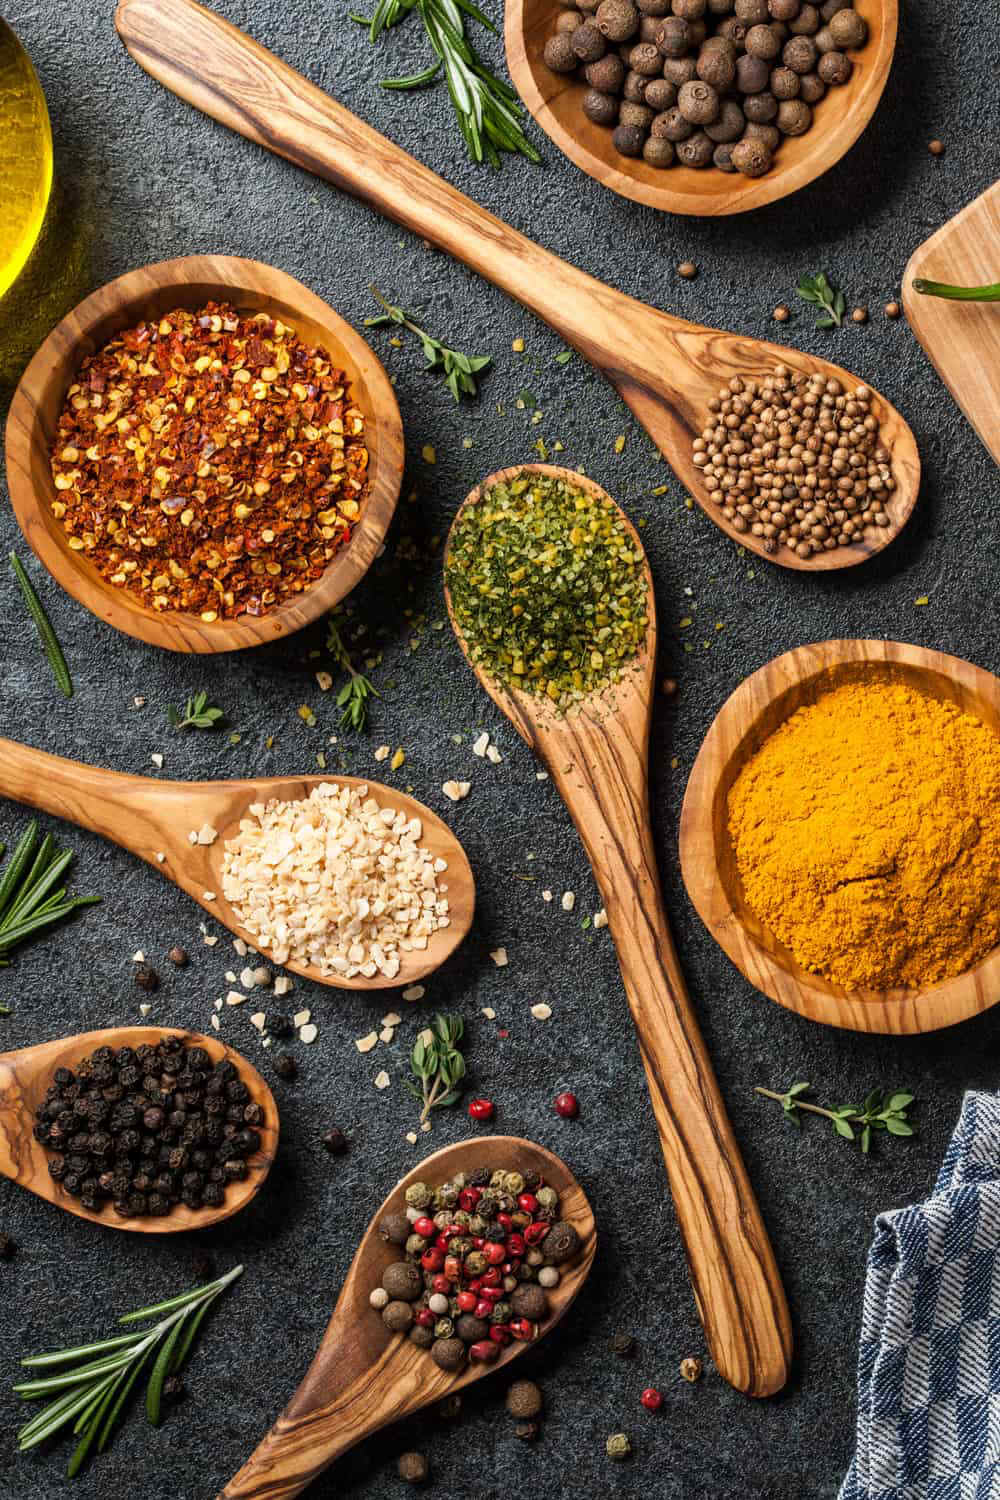 20 Essential Herbs & Spices for Every Home Cook